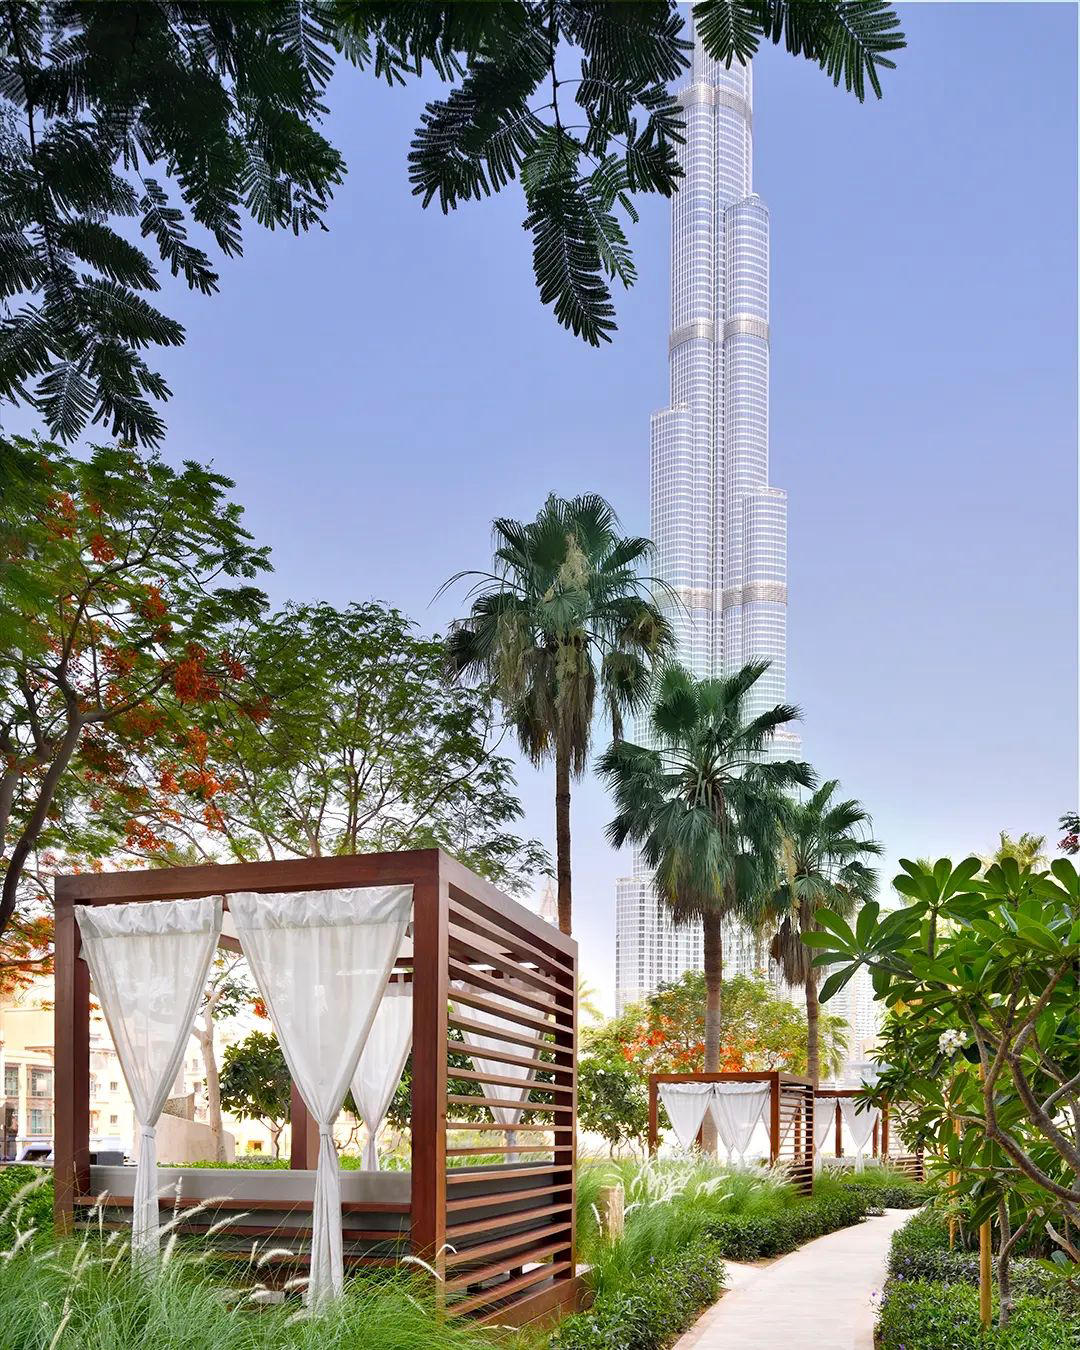 image  1 Immerse yourself in the cool comfort of our pool and take in majestic views of the Burj Khalifa